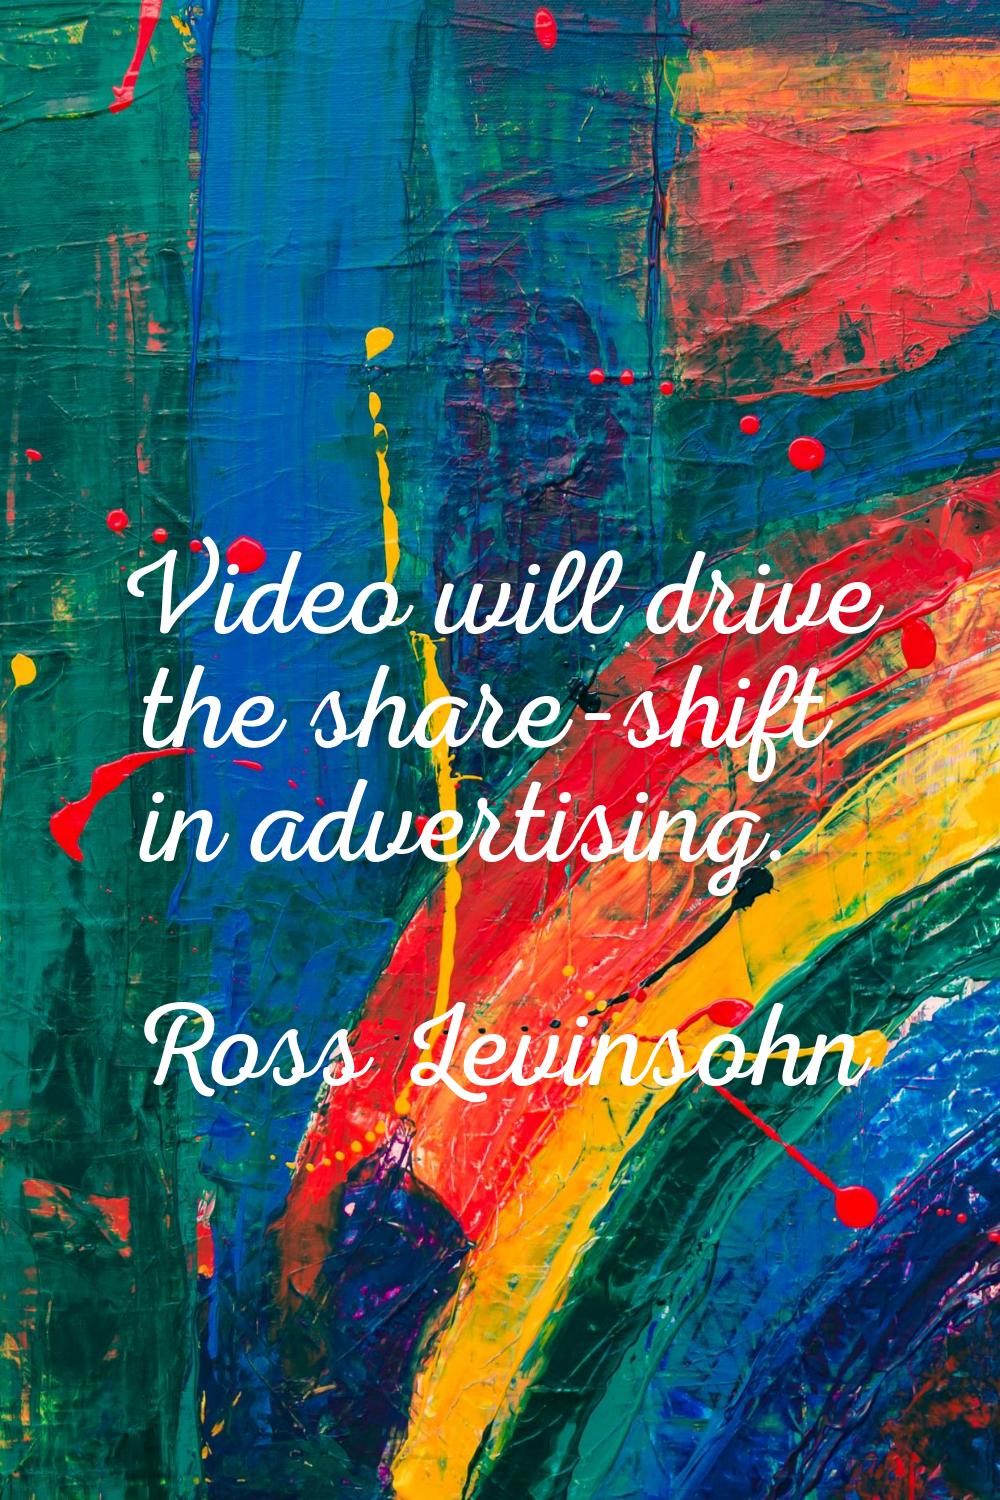 Video will drive the share-shift in advertising.